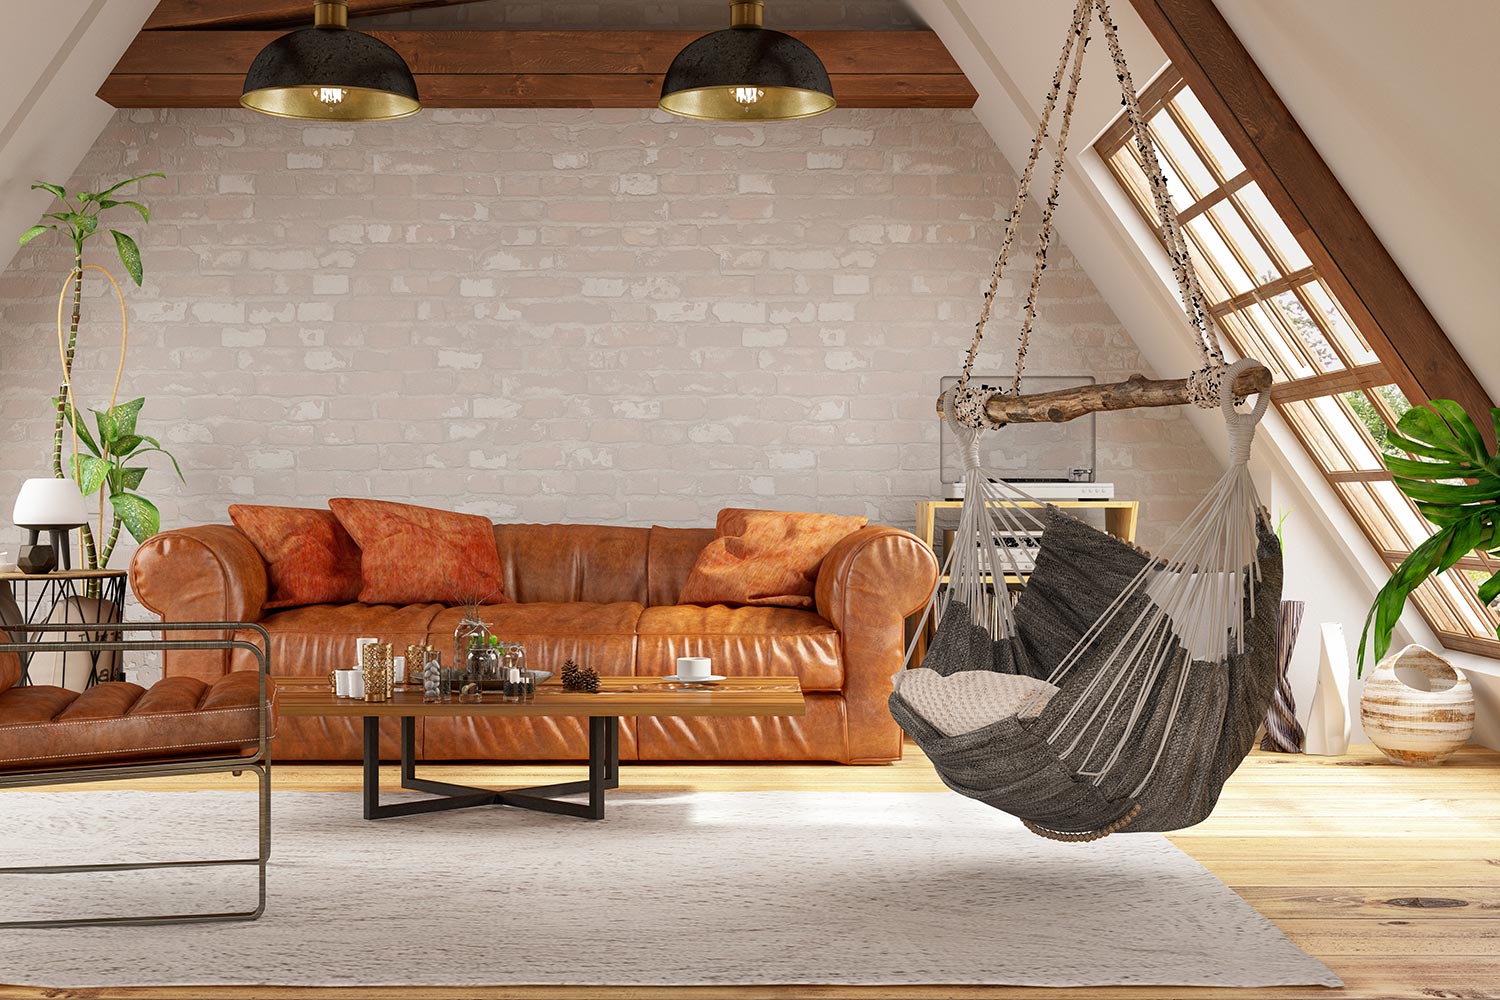 Loft room with hammock and furniture